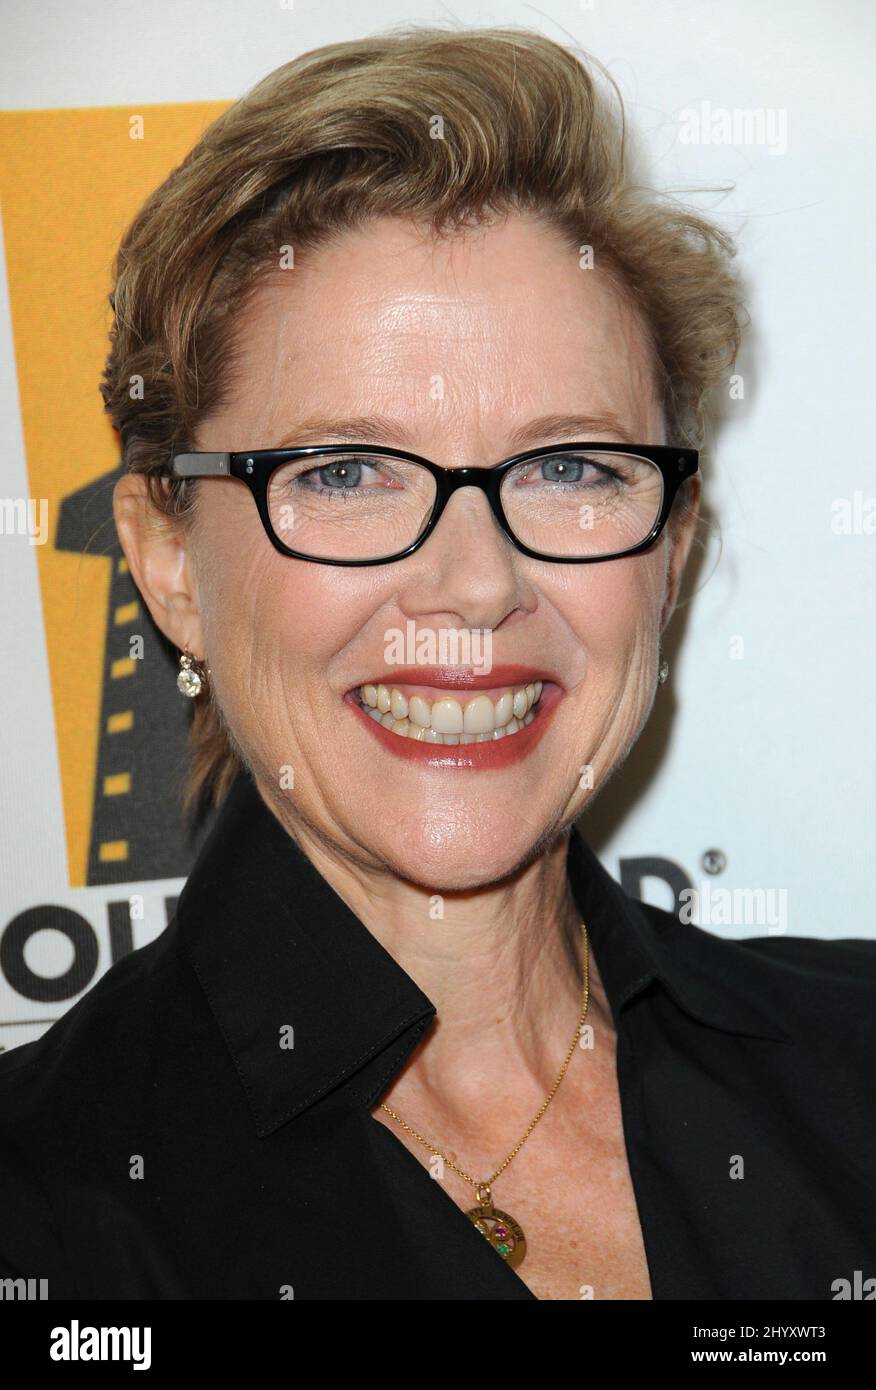 Annette Bening at the 14th Annual Hollywood Awards Gala held at the Beverly Hilton Hotel, Beverly Hills, California. Stock Photo